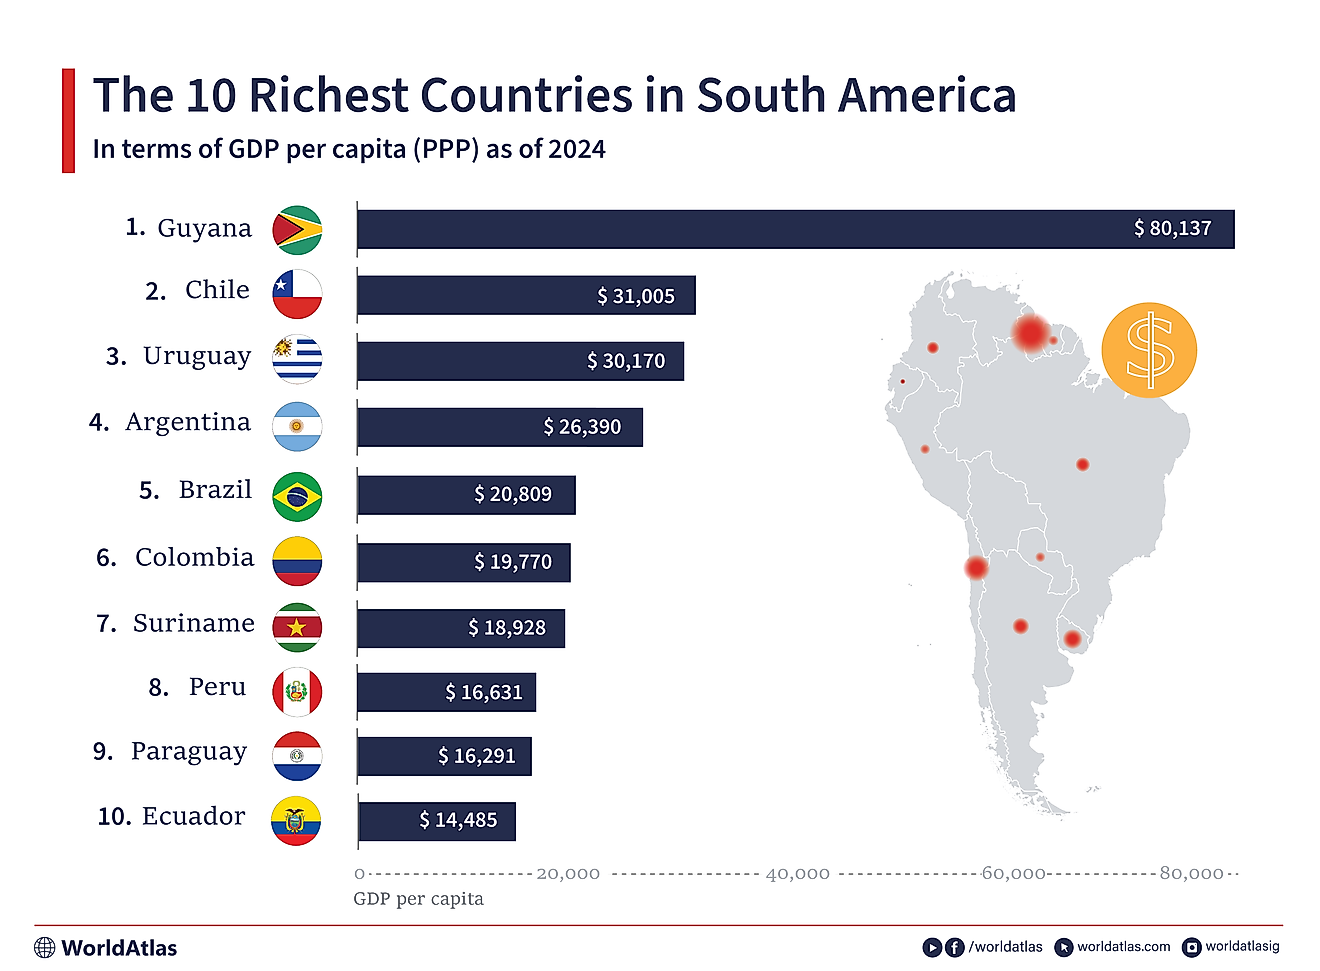 An infographic showing the 10 richest countries in south america